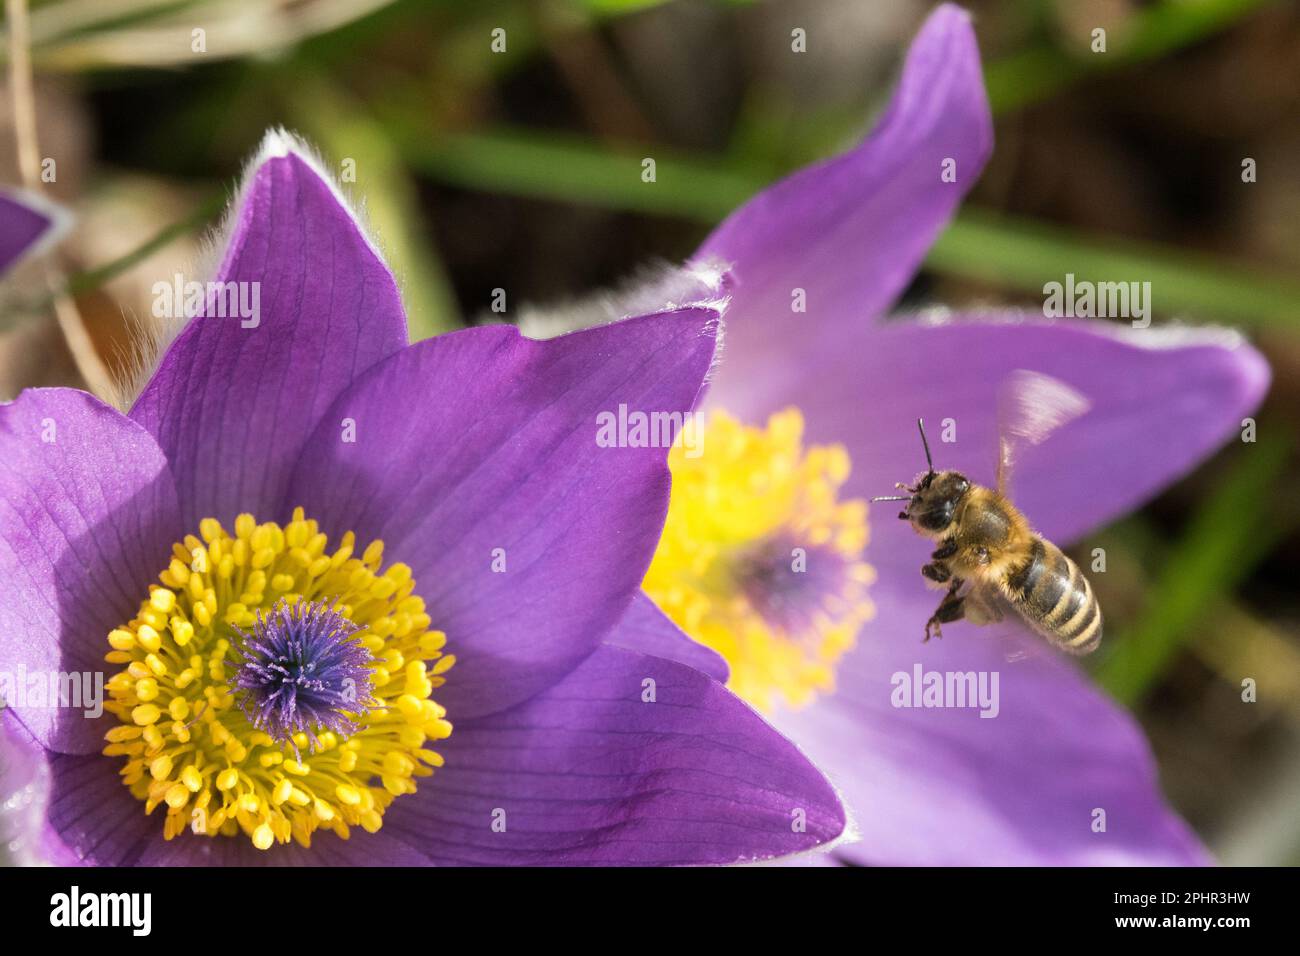 European honey bee, Flying, Flower, Pasque flower, Pulsatilla vulgaris, Bee-friendly, Plant in Early spring, Insect Stock Photo